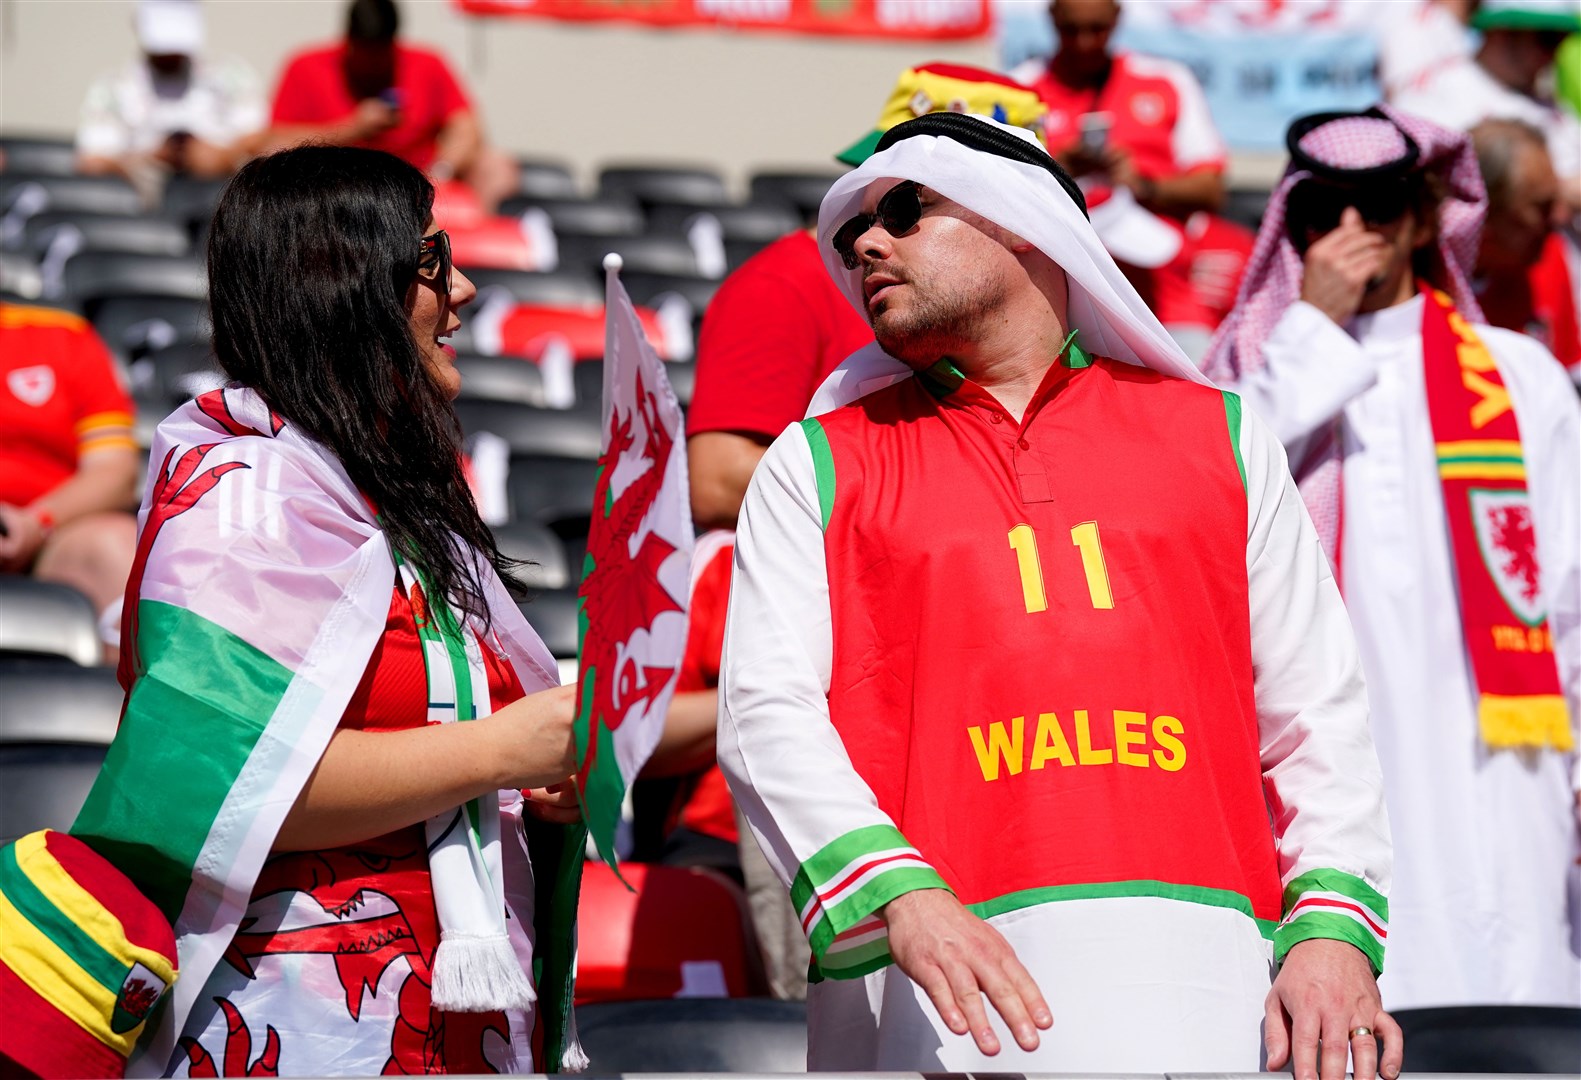 Wales fans in the stands at the Ahmad Bin Ali Stadium ahead of the match against Iran (Adam Davy/PA)